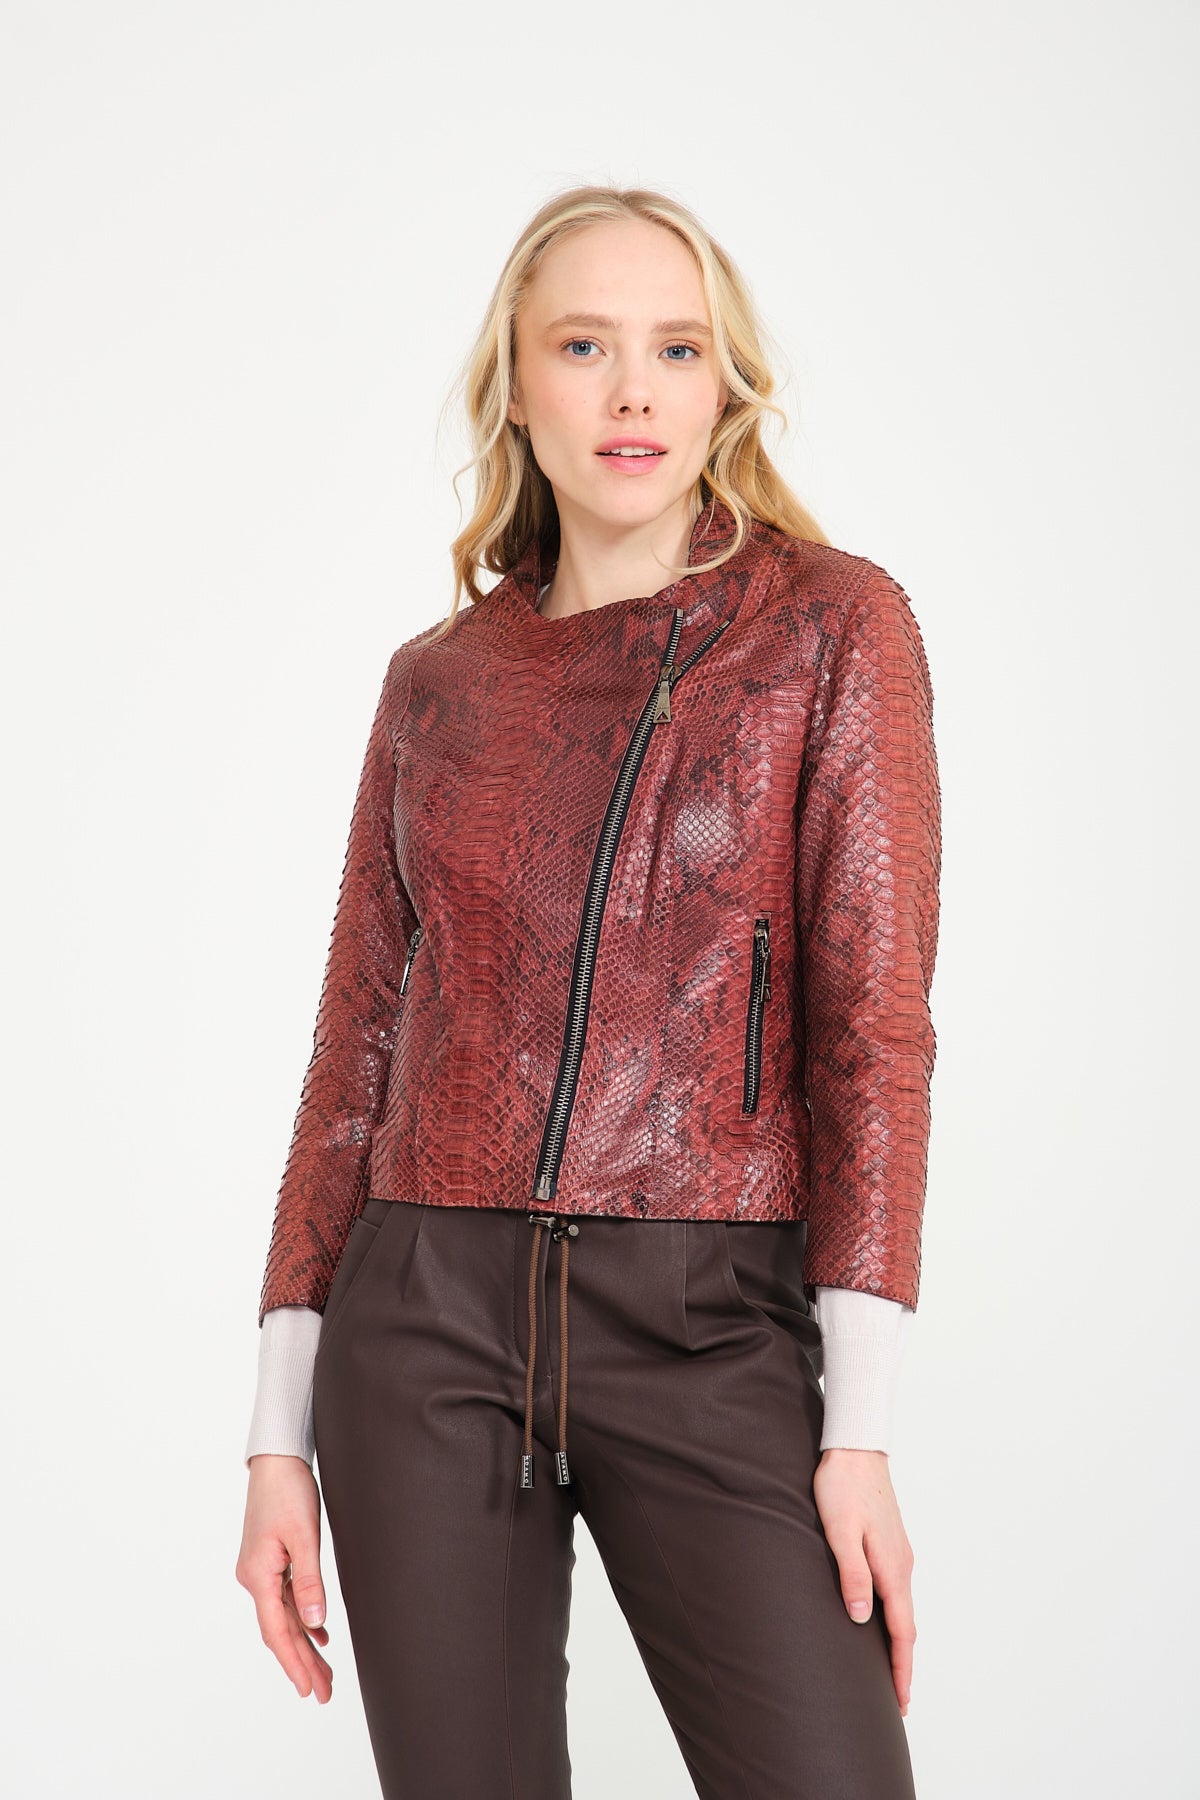 Long-lasting, Durable Women's Leather Jacket Models are on 